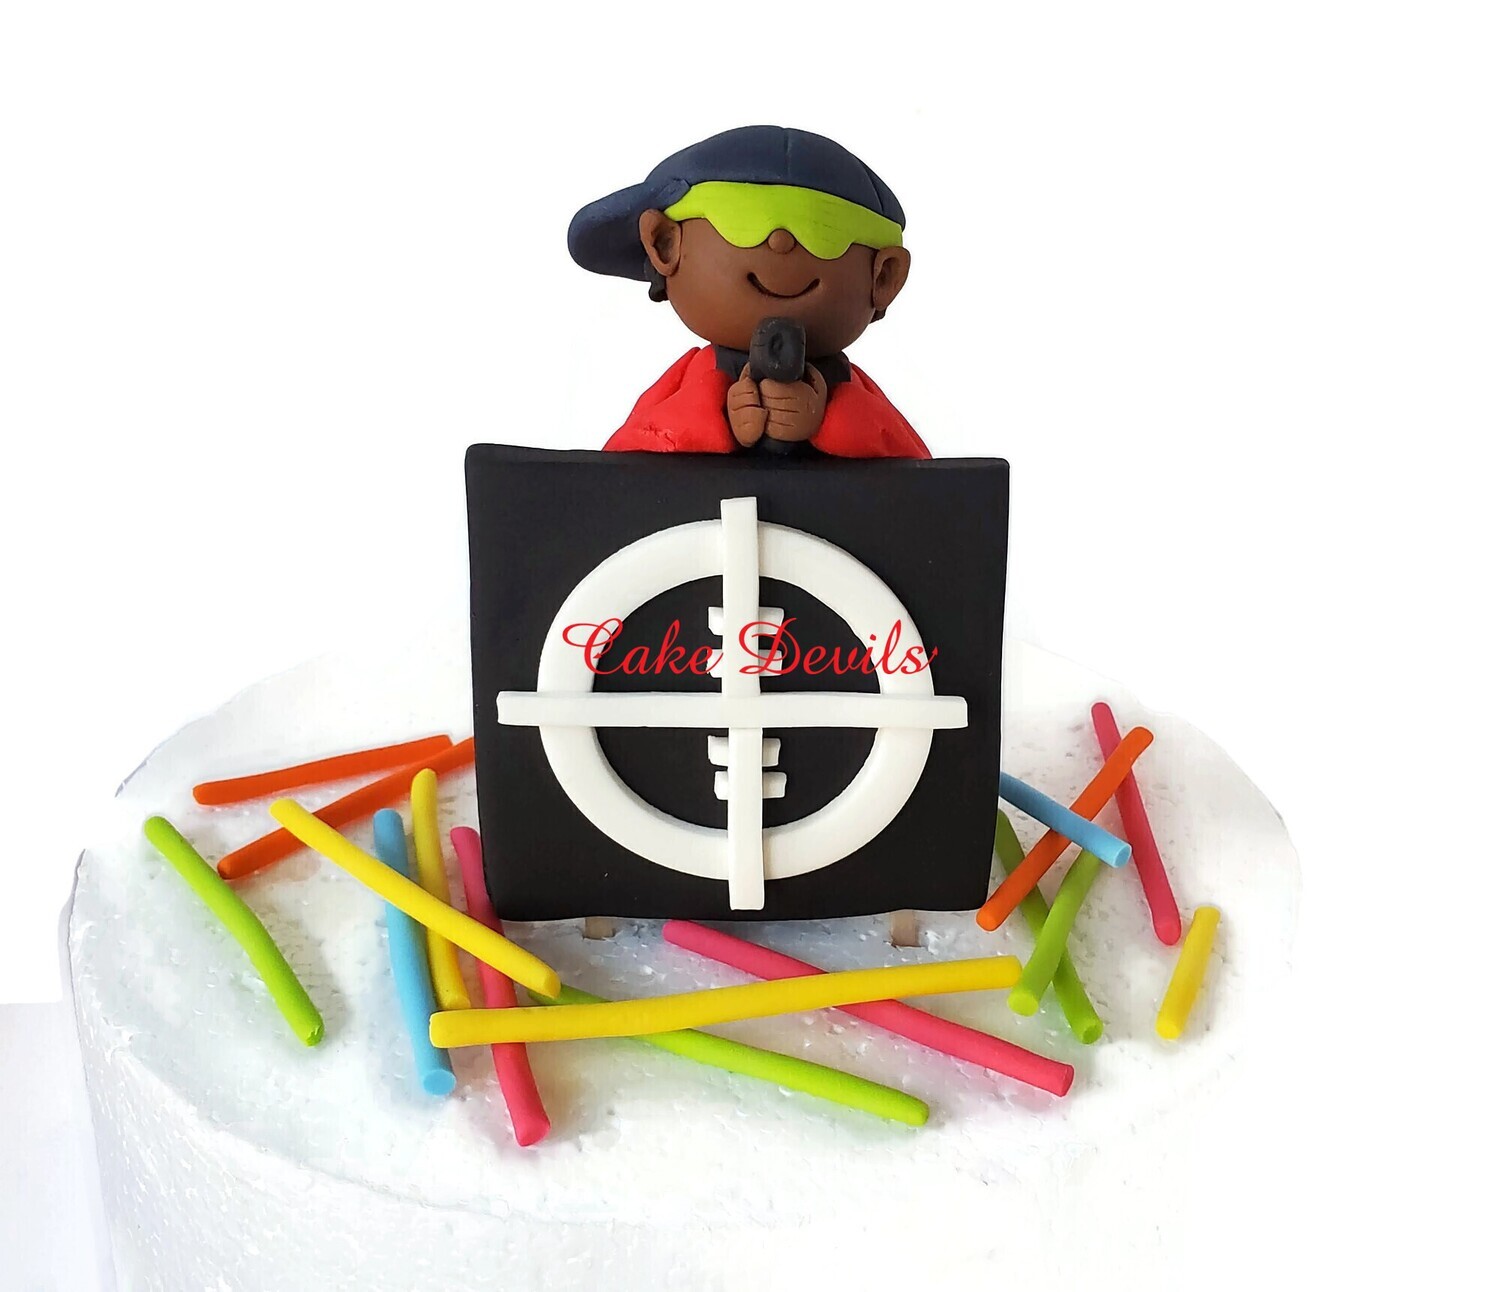 Laser Tag Player with Target and Laser Sticks fondant Cake Toppers for a Game Birthday Party